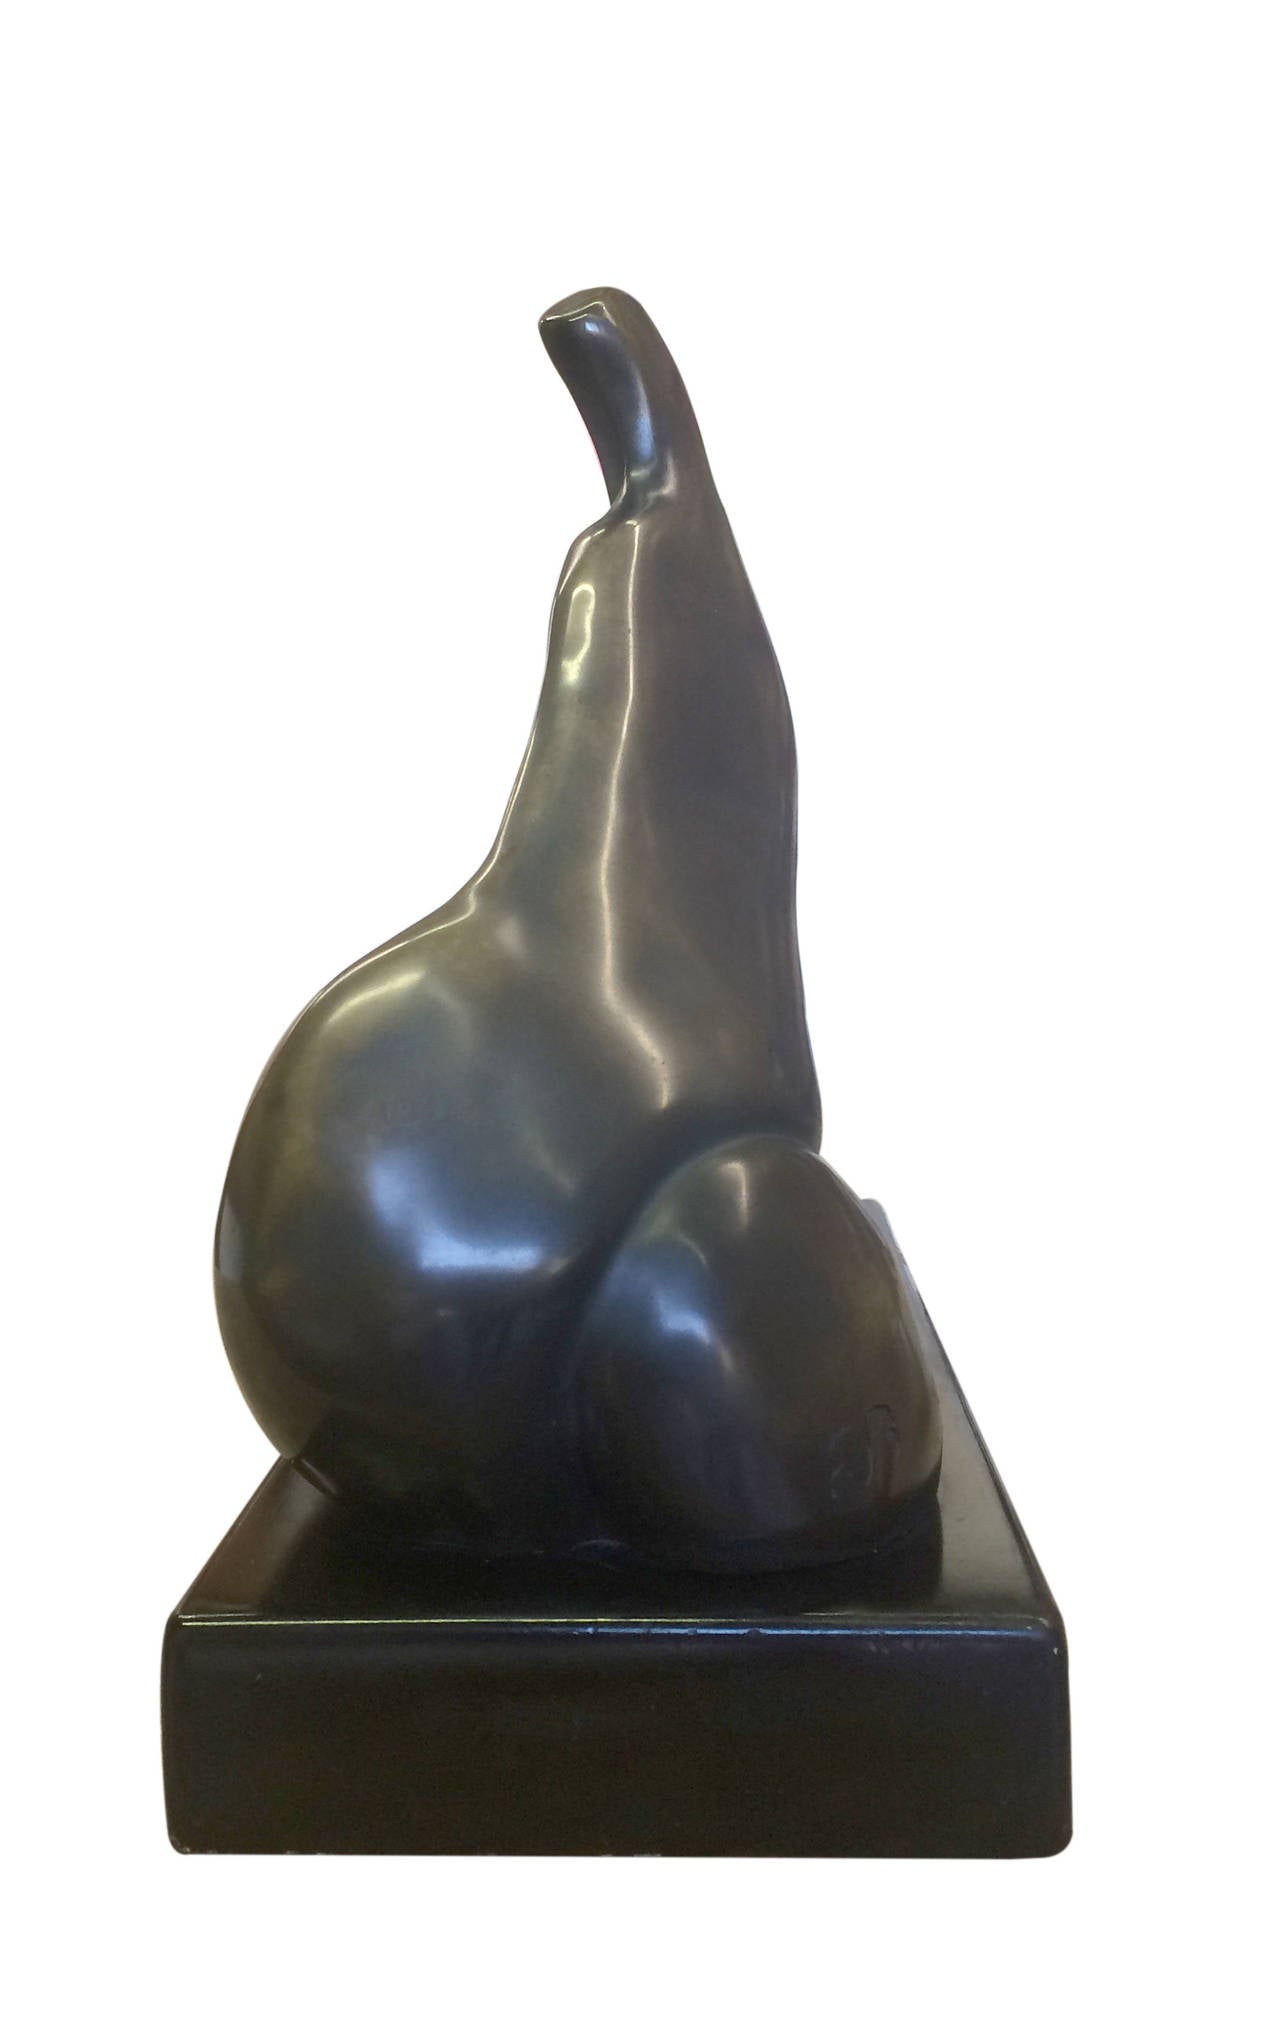 This patinated bronze sculpture partially depicting a nude woman in repose is entitled 